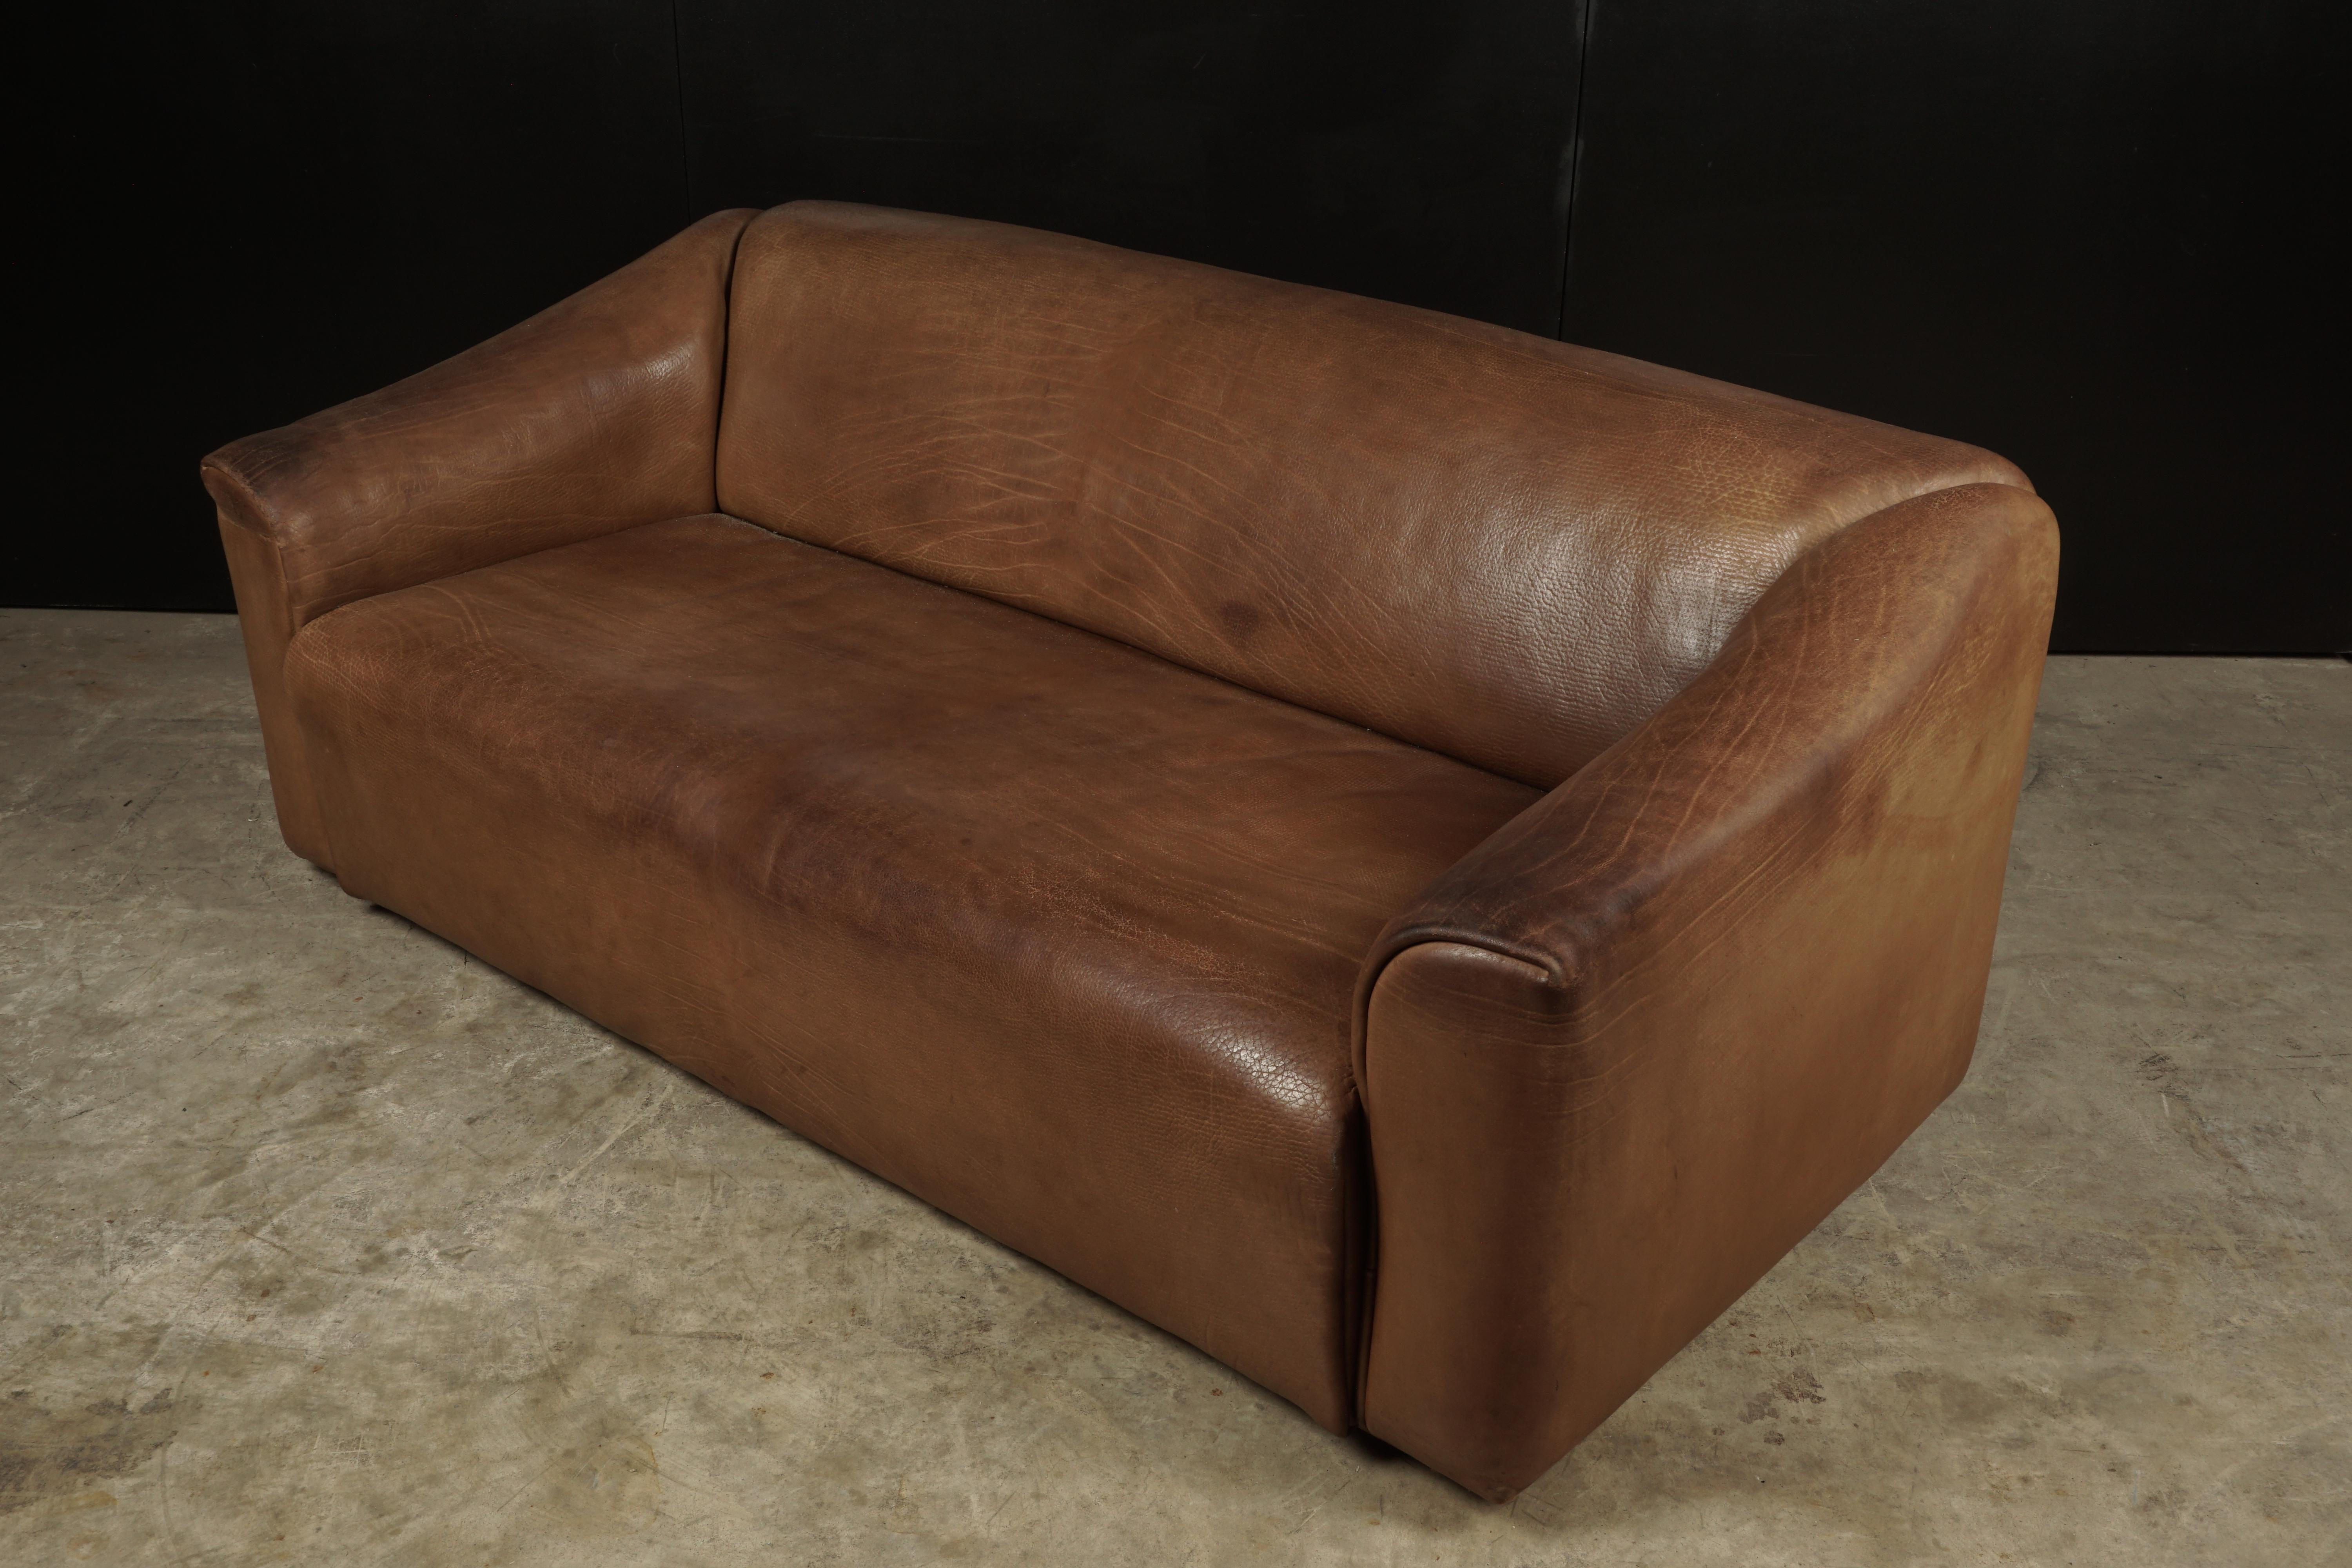 Midcentury three-seat leather sofa manufactured by De Sede, Switzerland, model DS 47. Original thick buffalo leather upholstery. Seat extends about 5-6